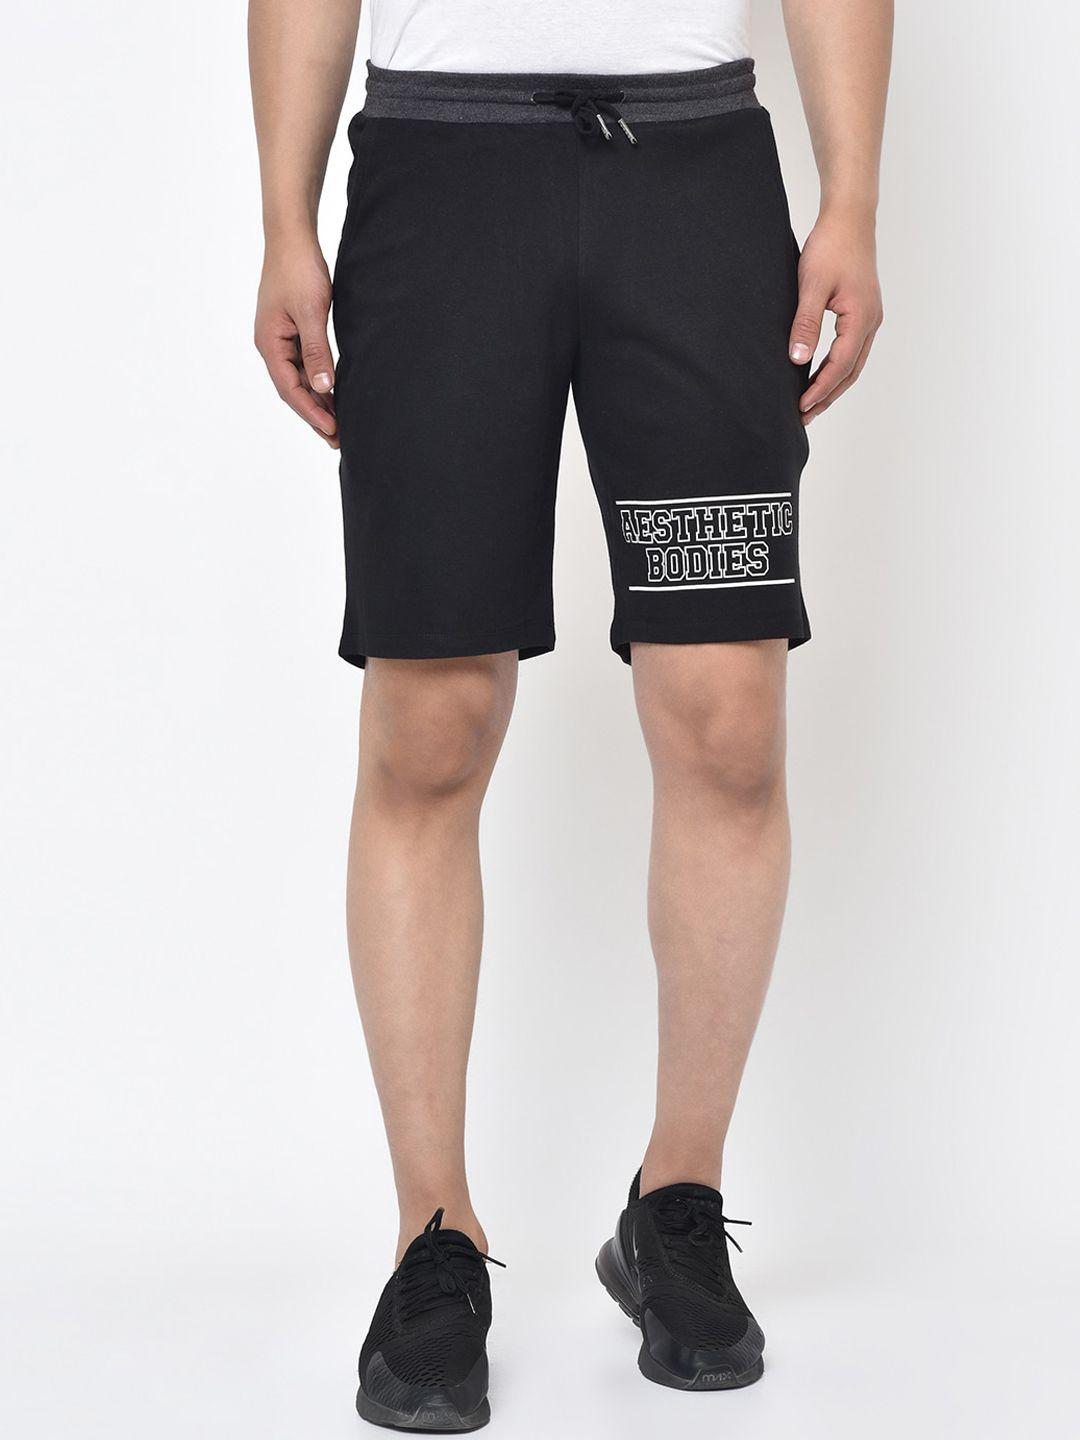 aesthetic bodies men black placement printed training or gym shorts